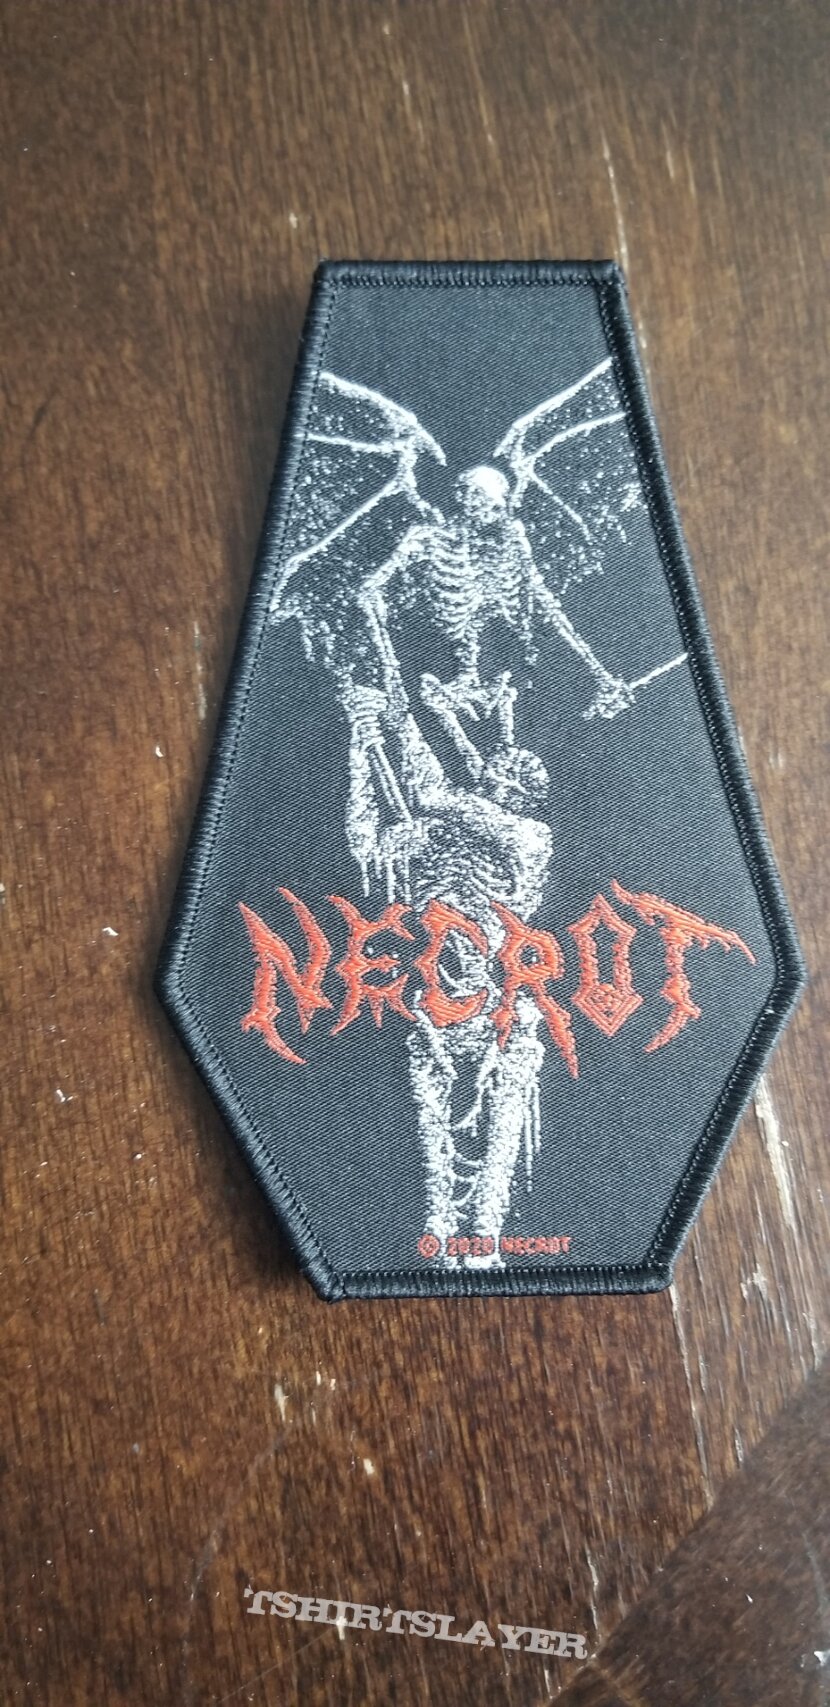 Necrot patch